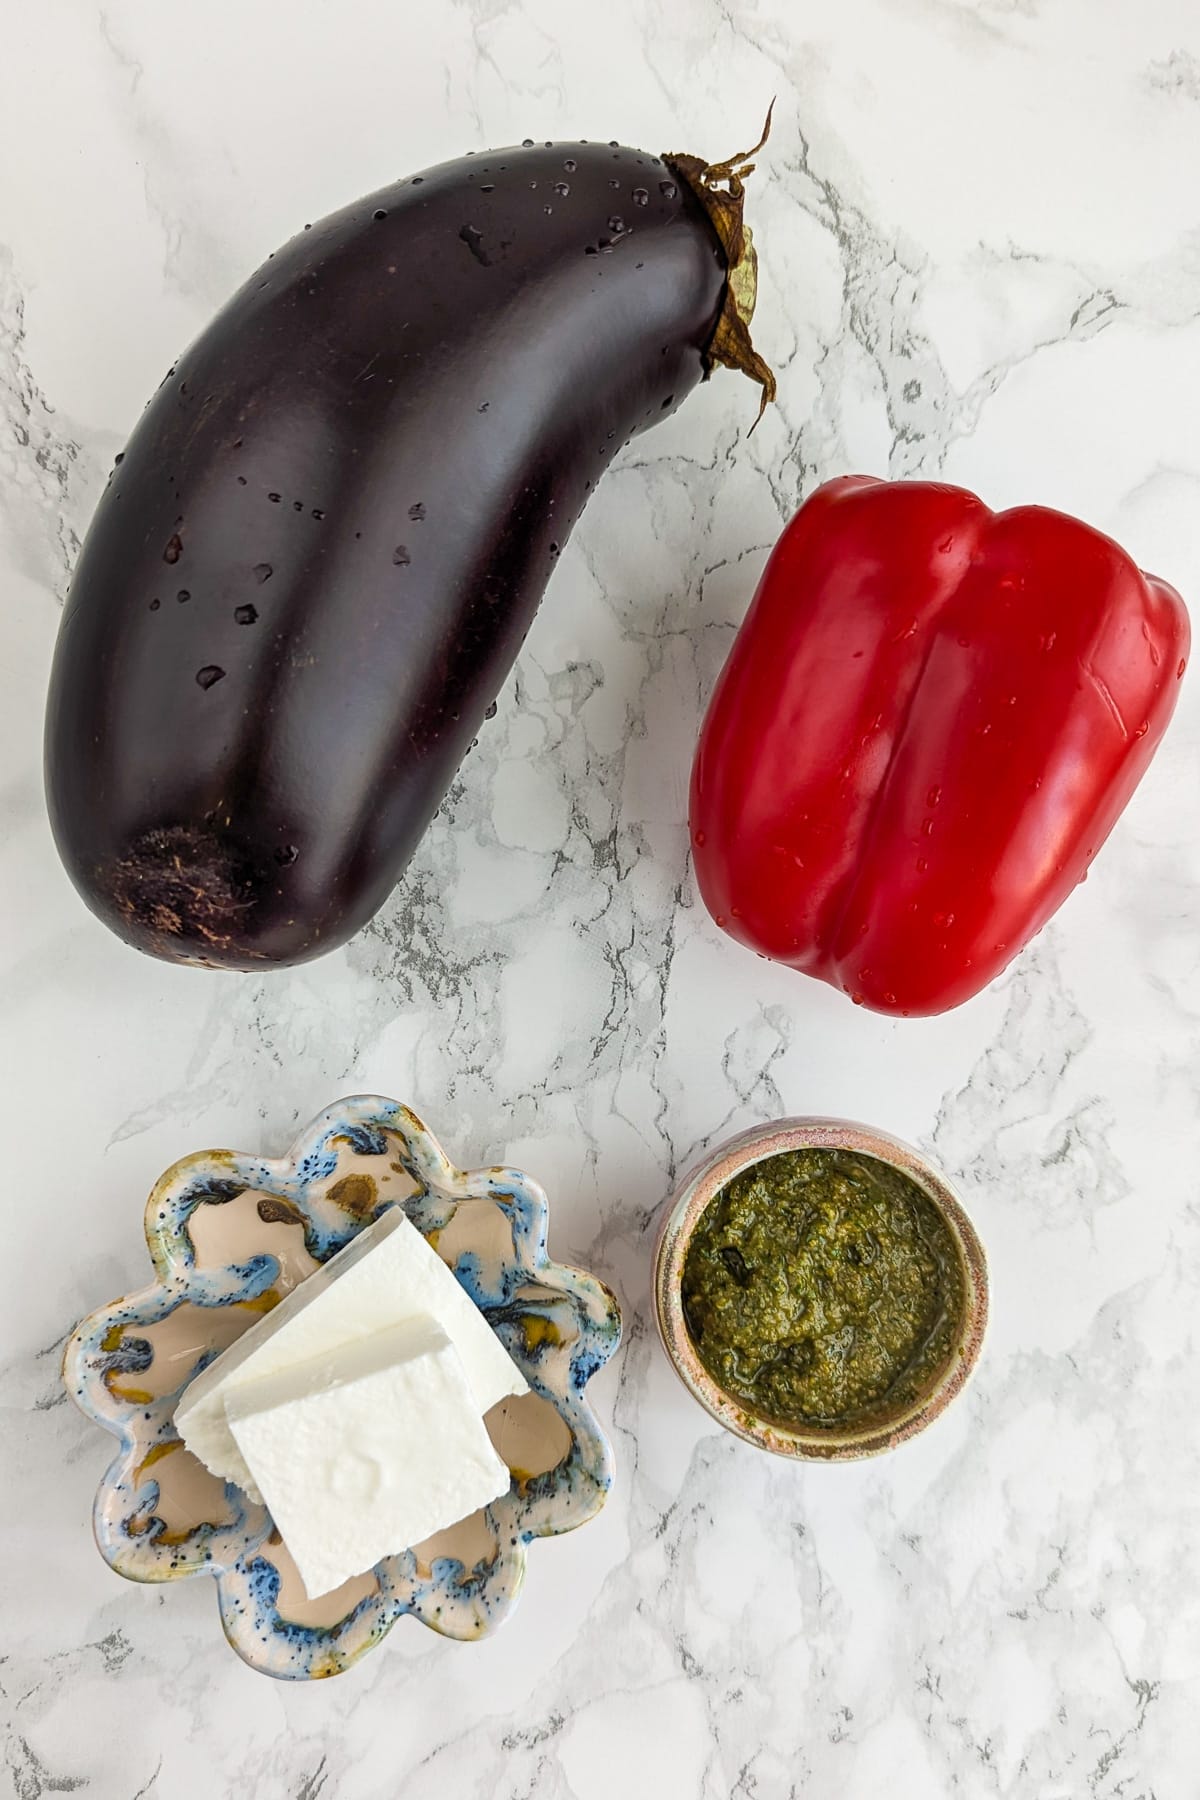 Top view of a large eggplant, bell peppers, basil pesto and two slices of feta cheese.